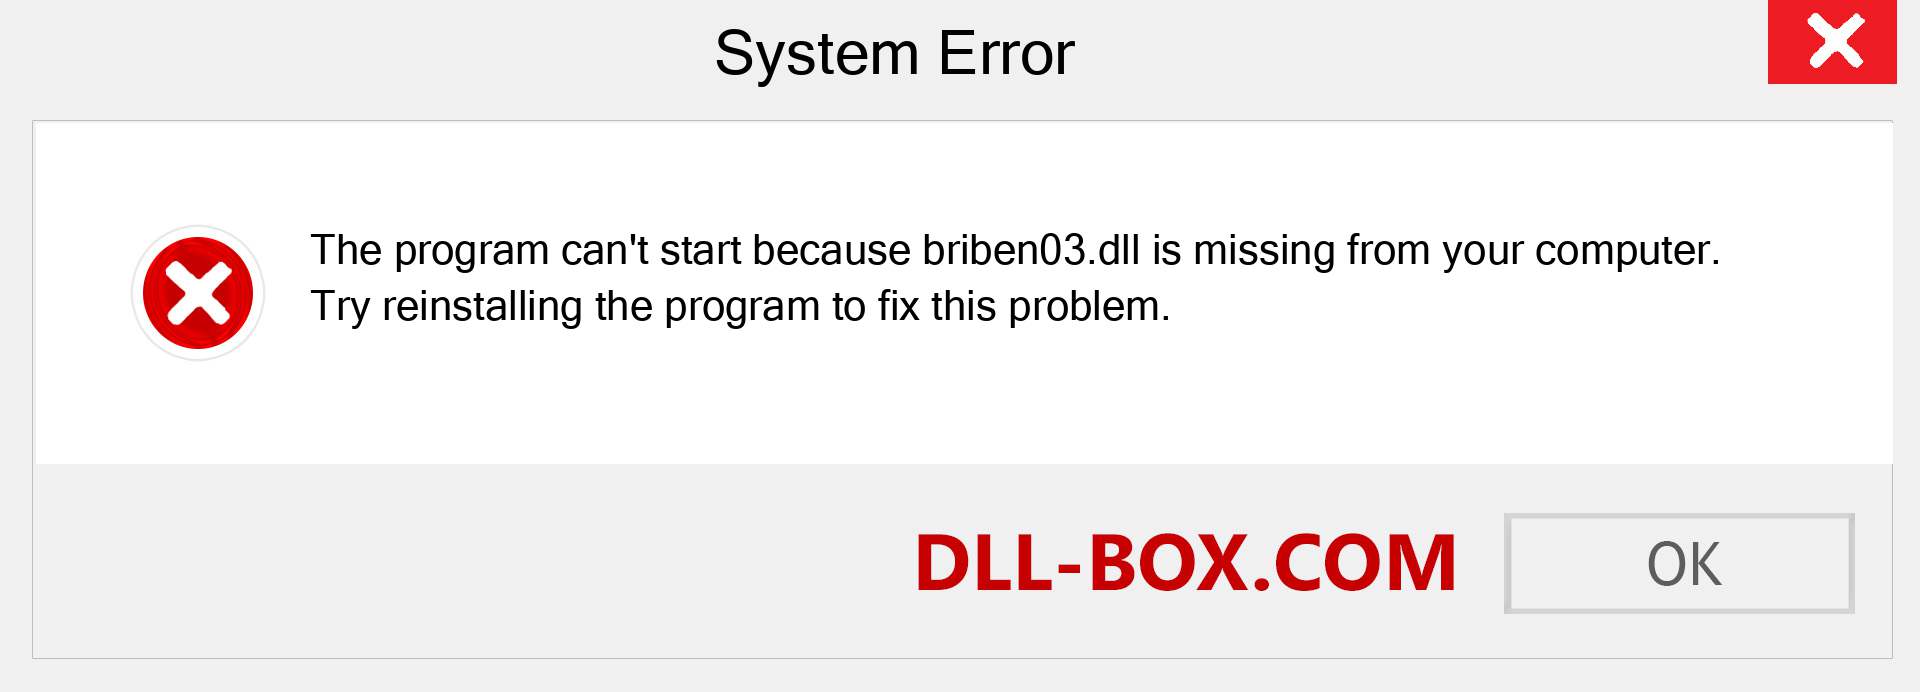  briben03.dll file is missing?. Download for Windows 7, 8, 10 - Fix  briben03 dll Missing Error on Windows, photos, images